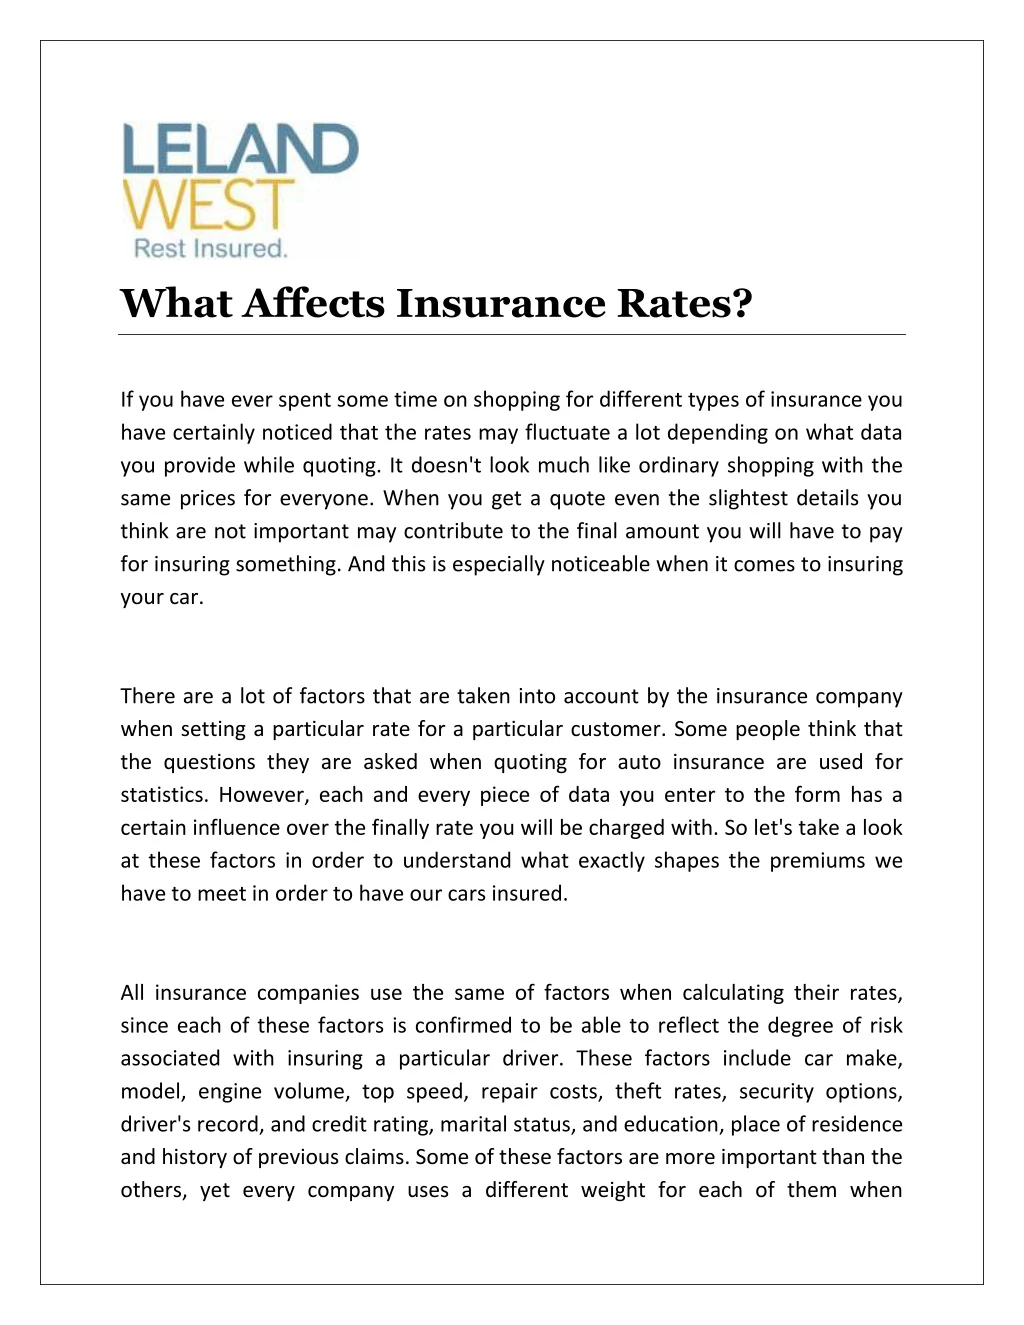 what affects insurance rates